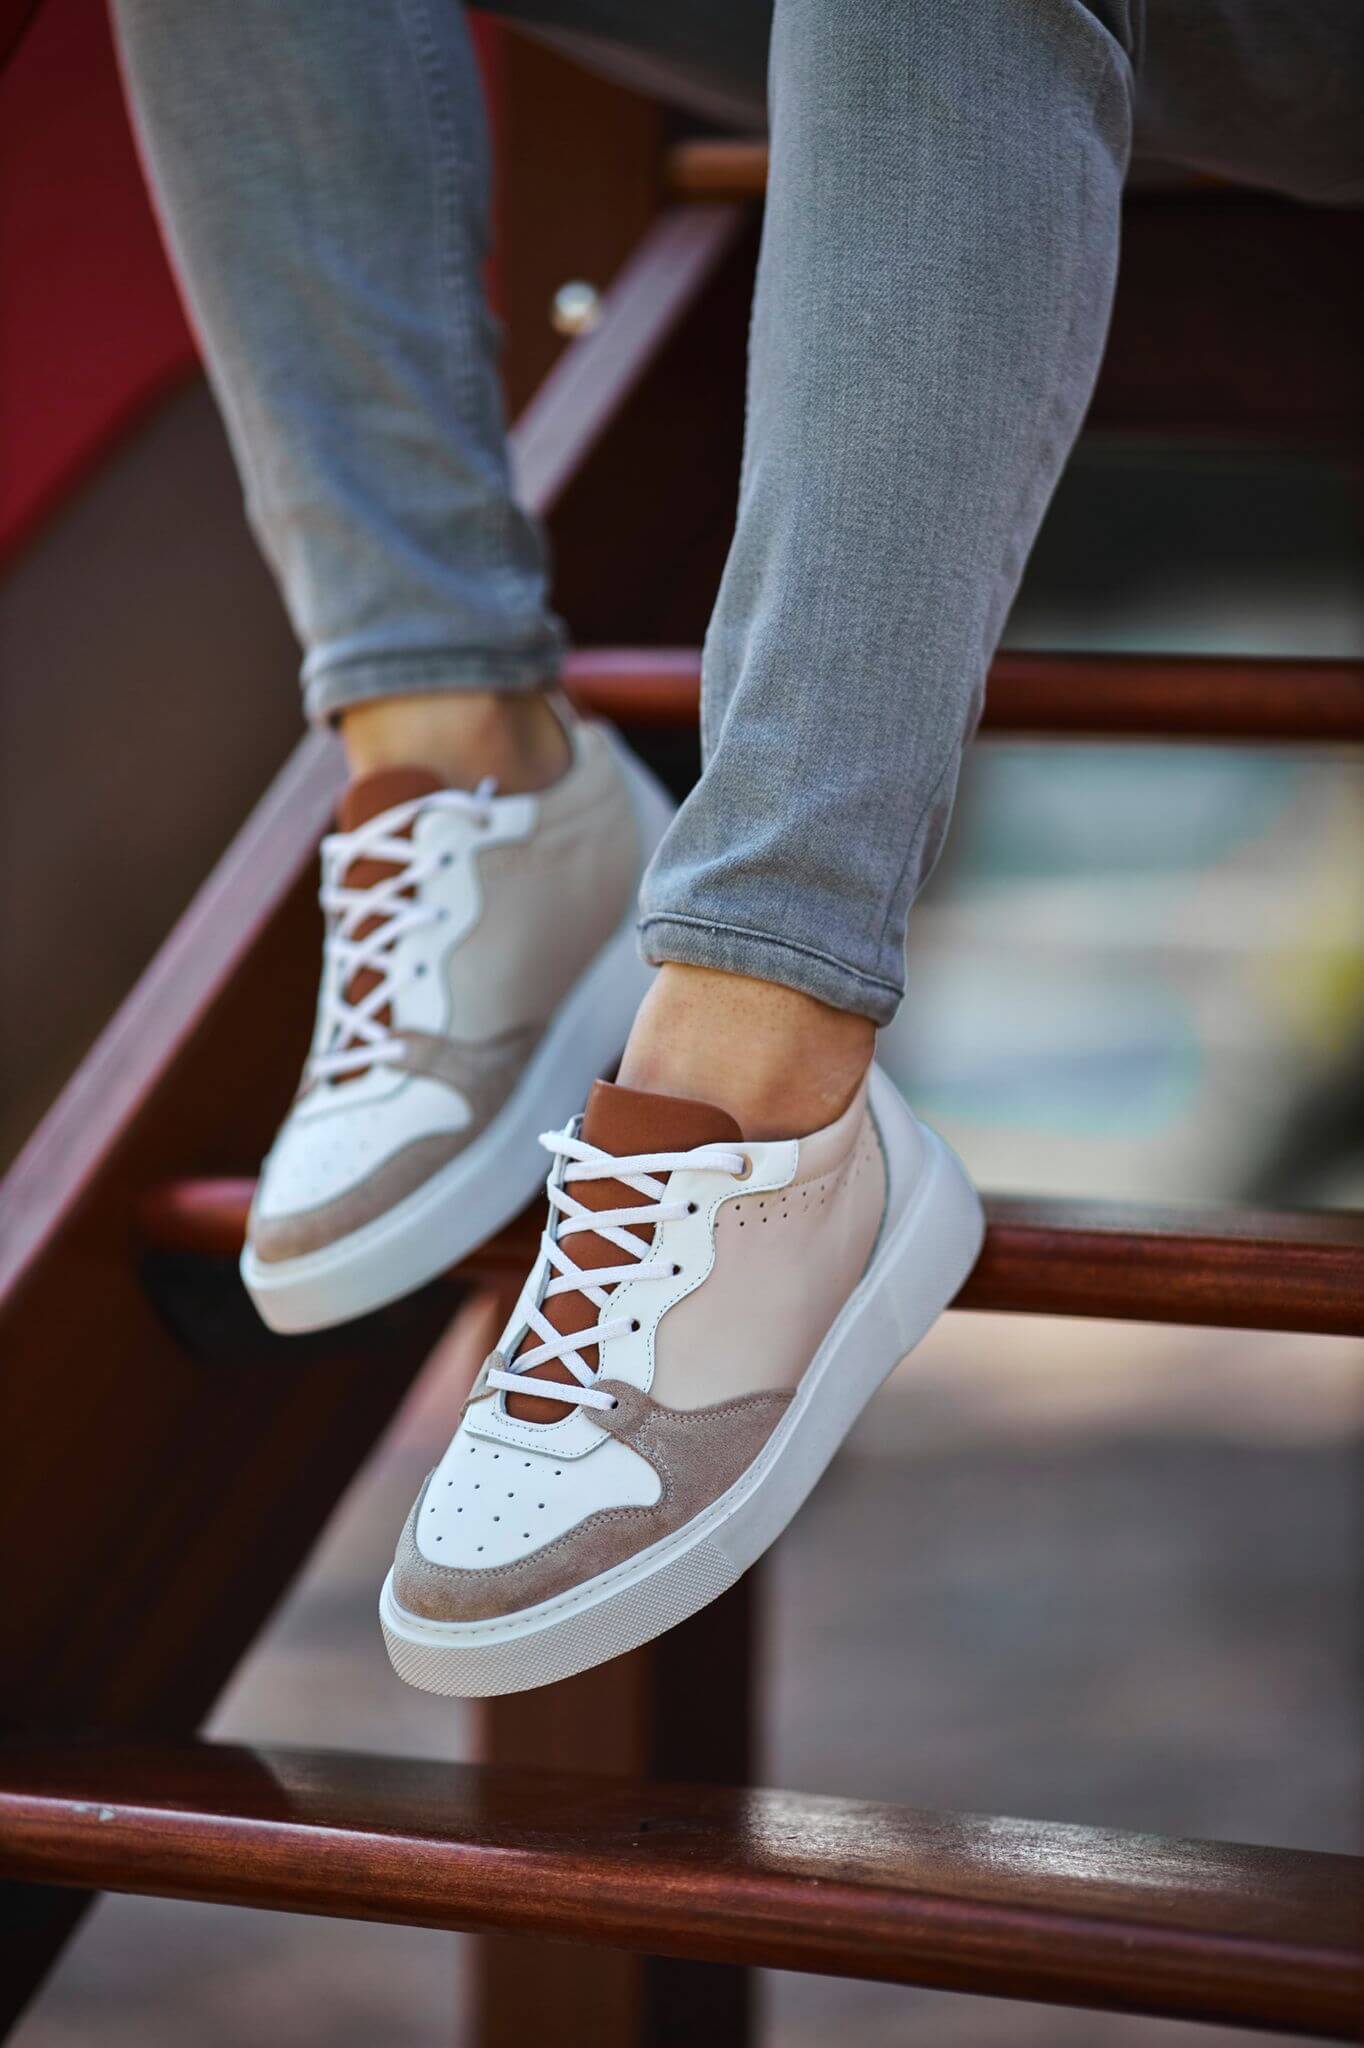 A Beige Lace Up Sneaker on display.